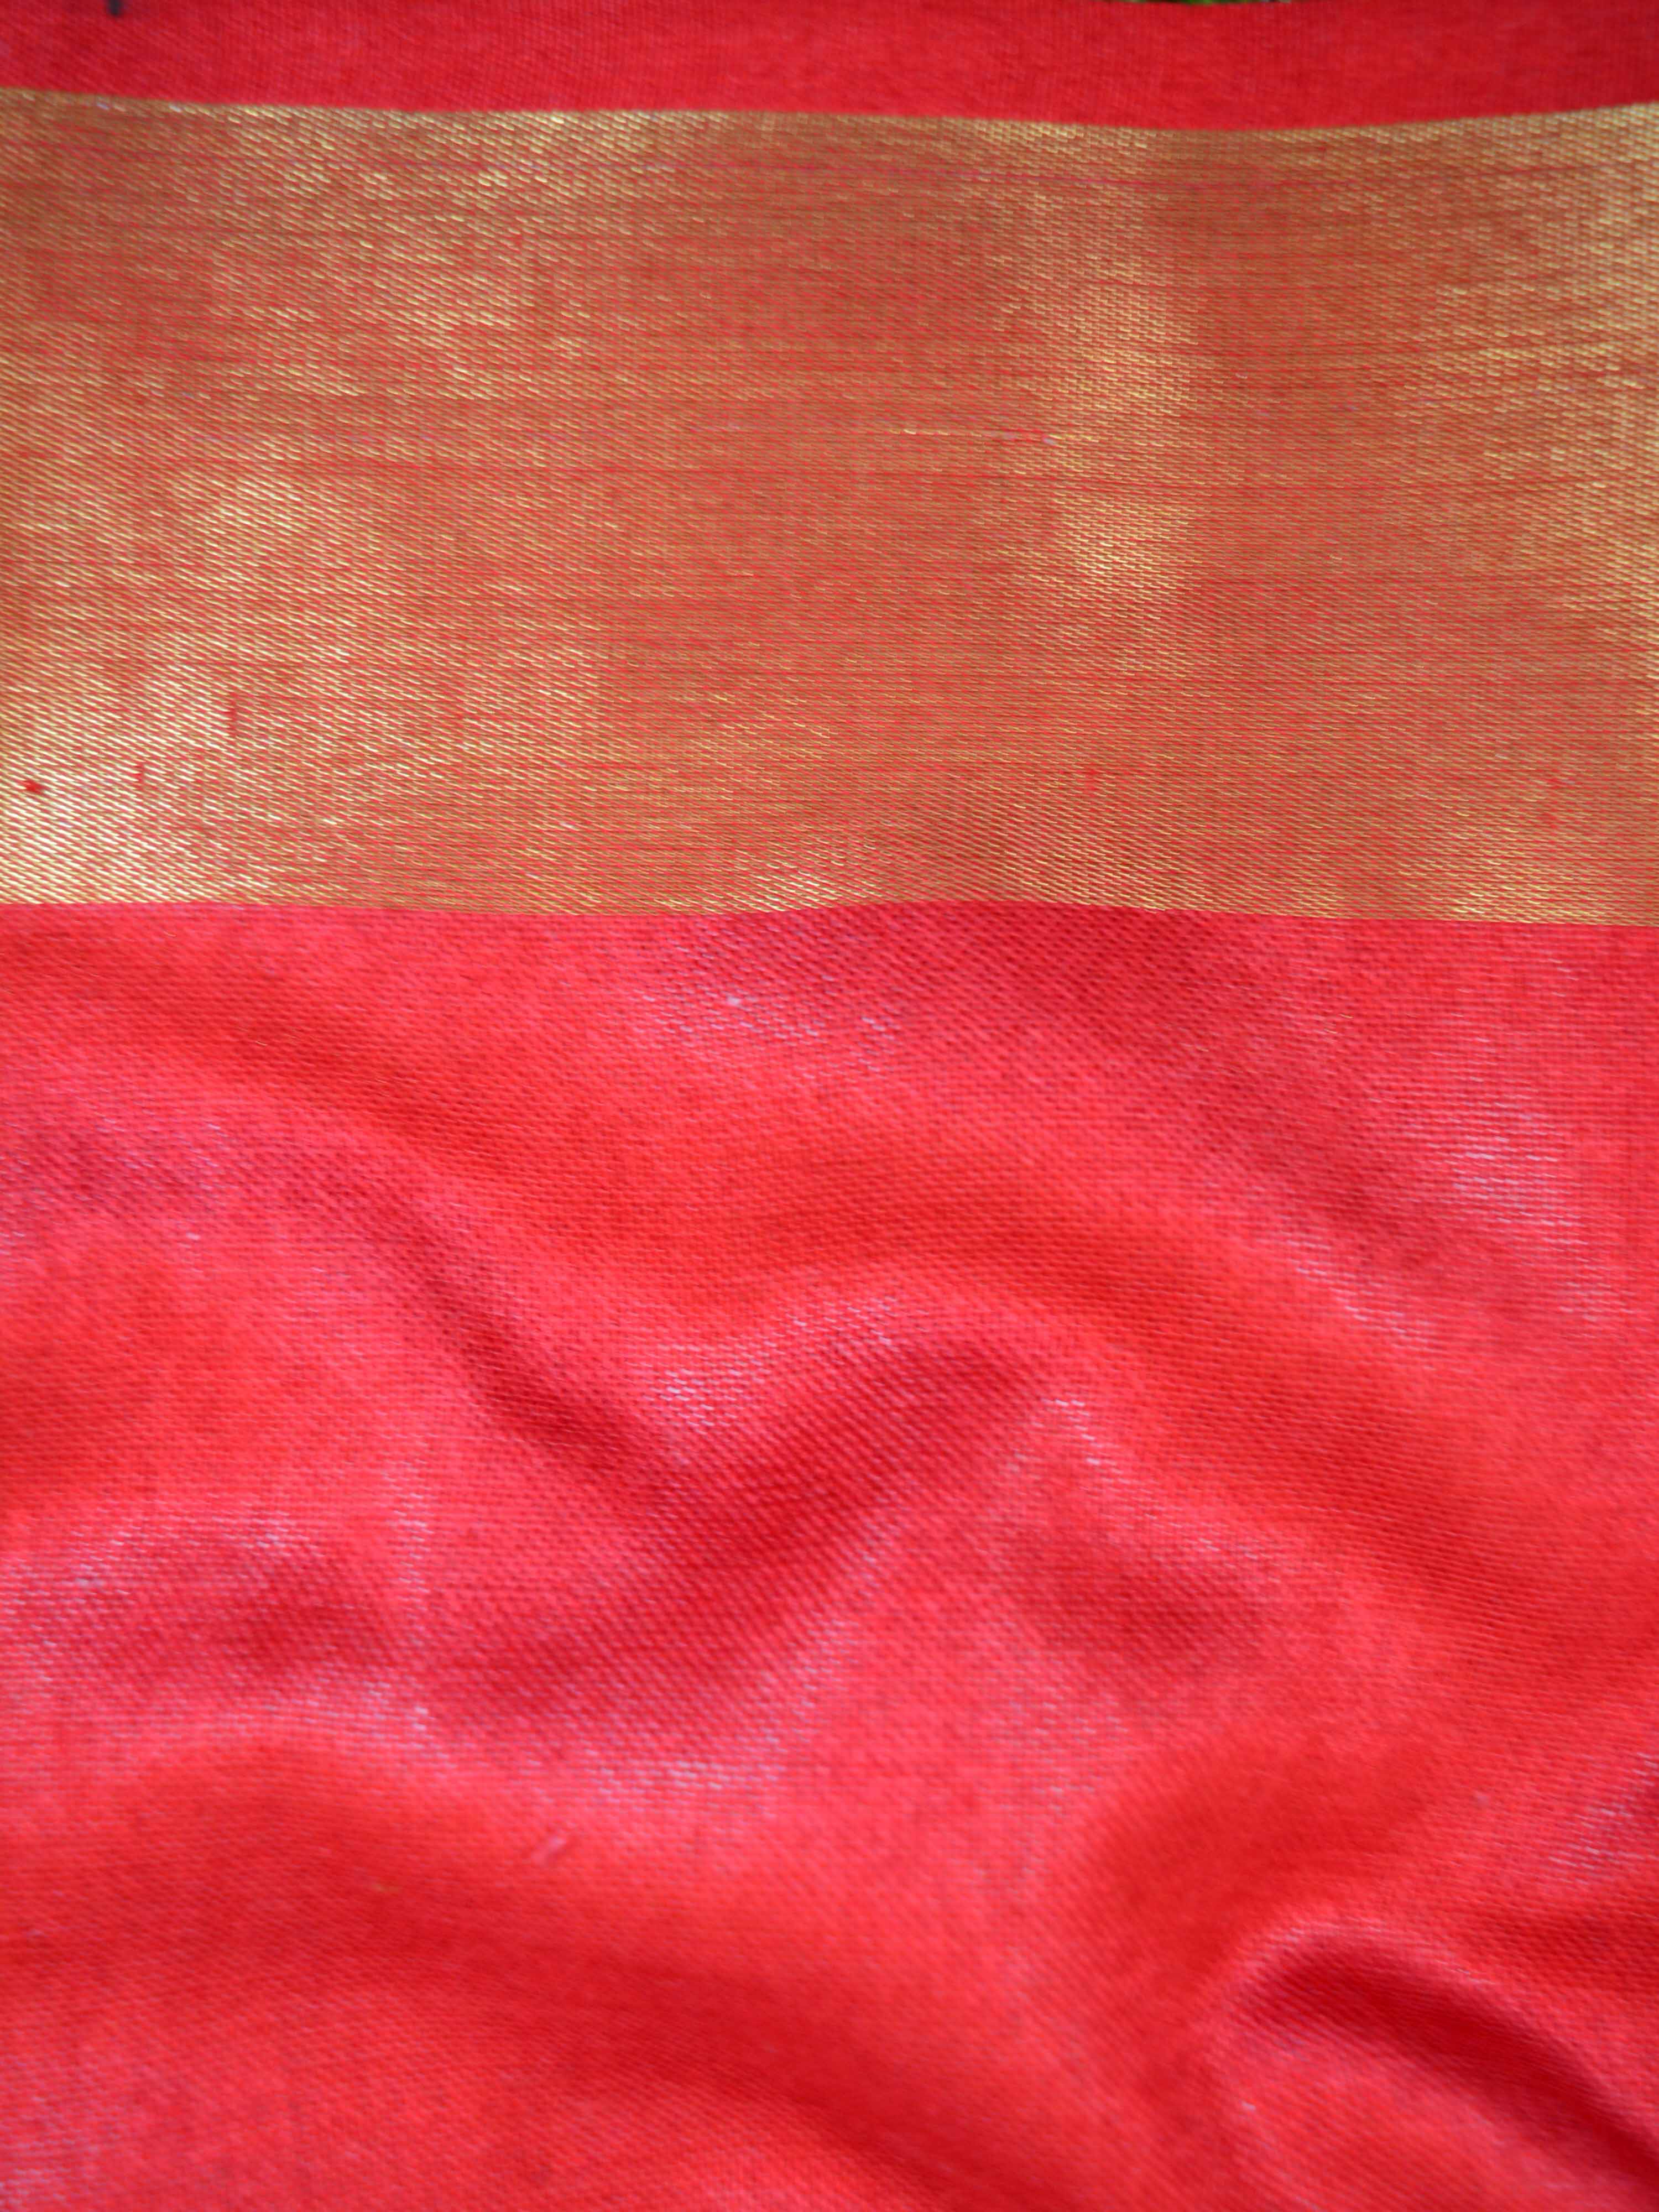 Banarasee Handloom Pure Linen Saree With Red Brocade Blouse-Off White